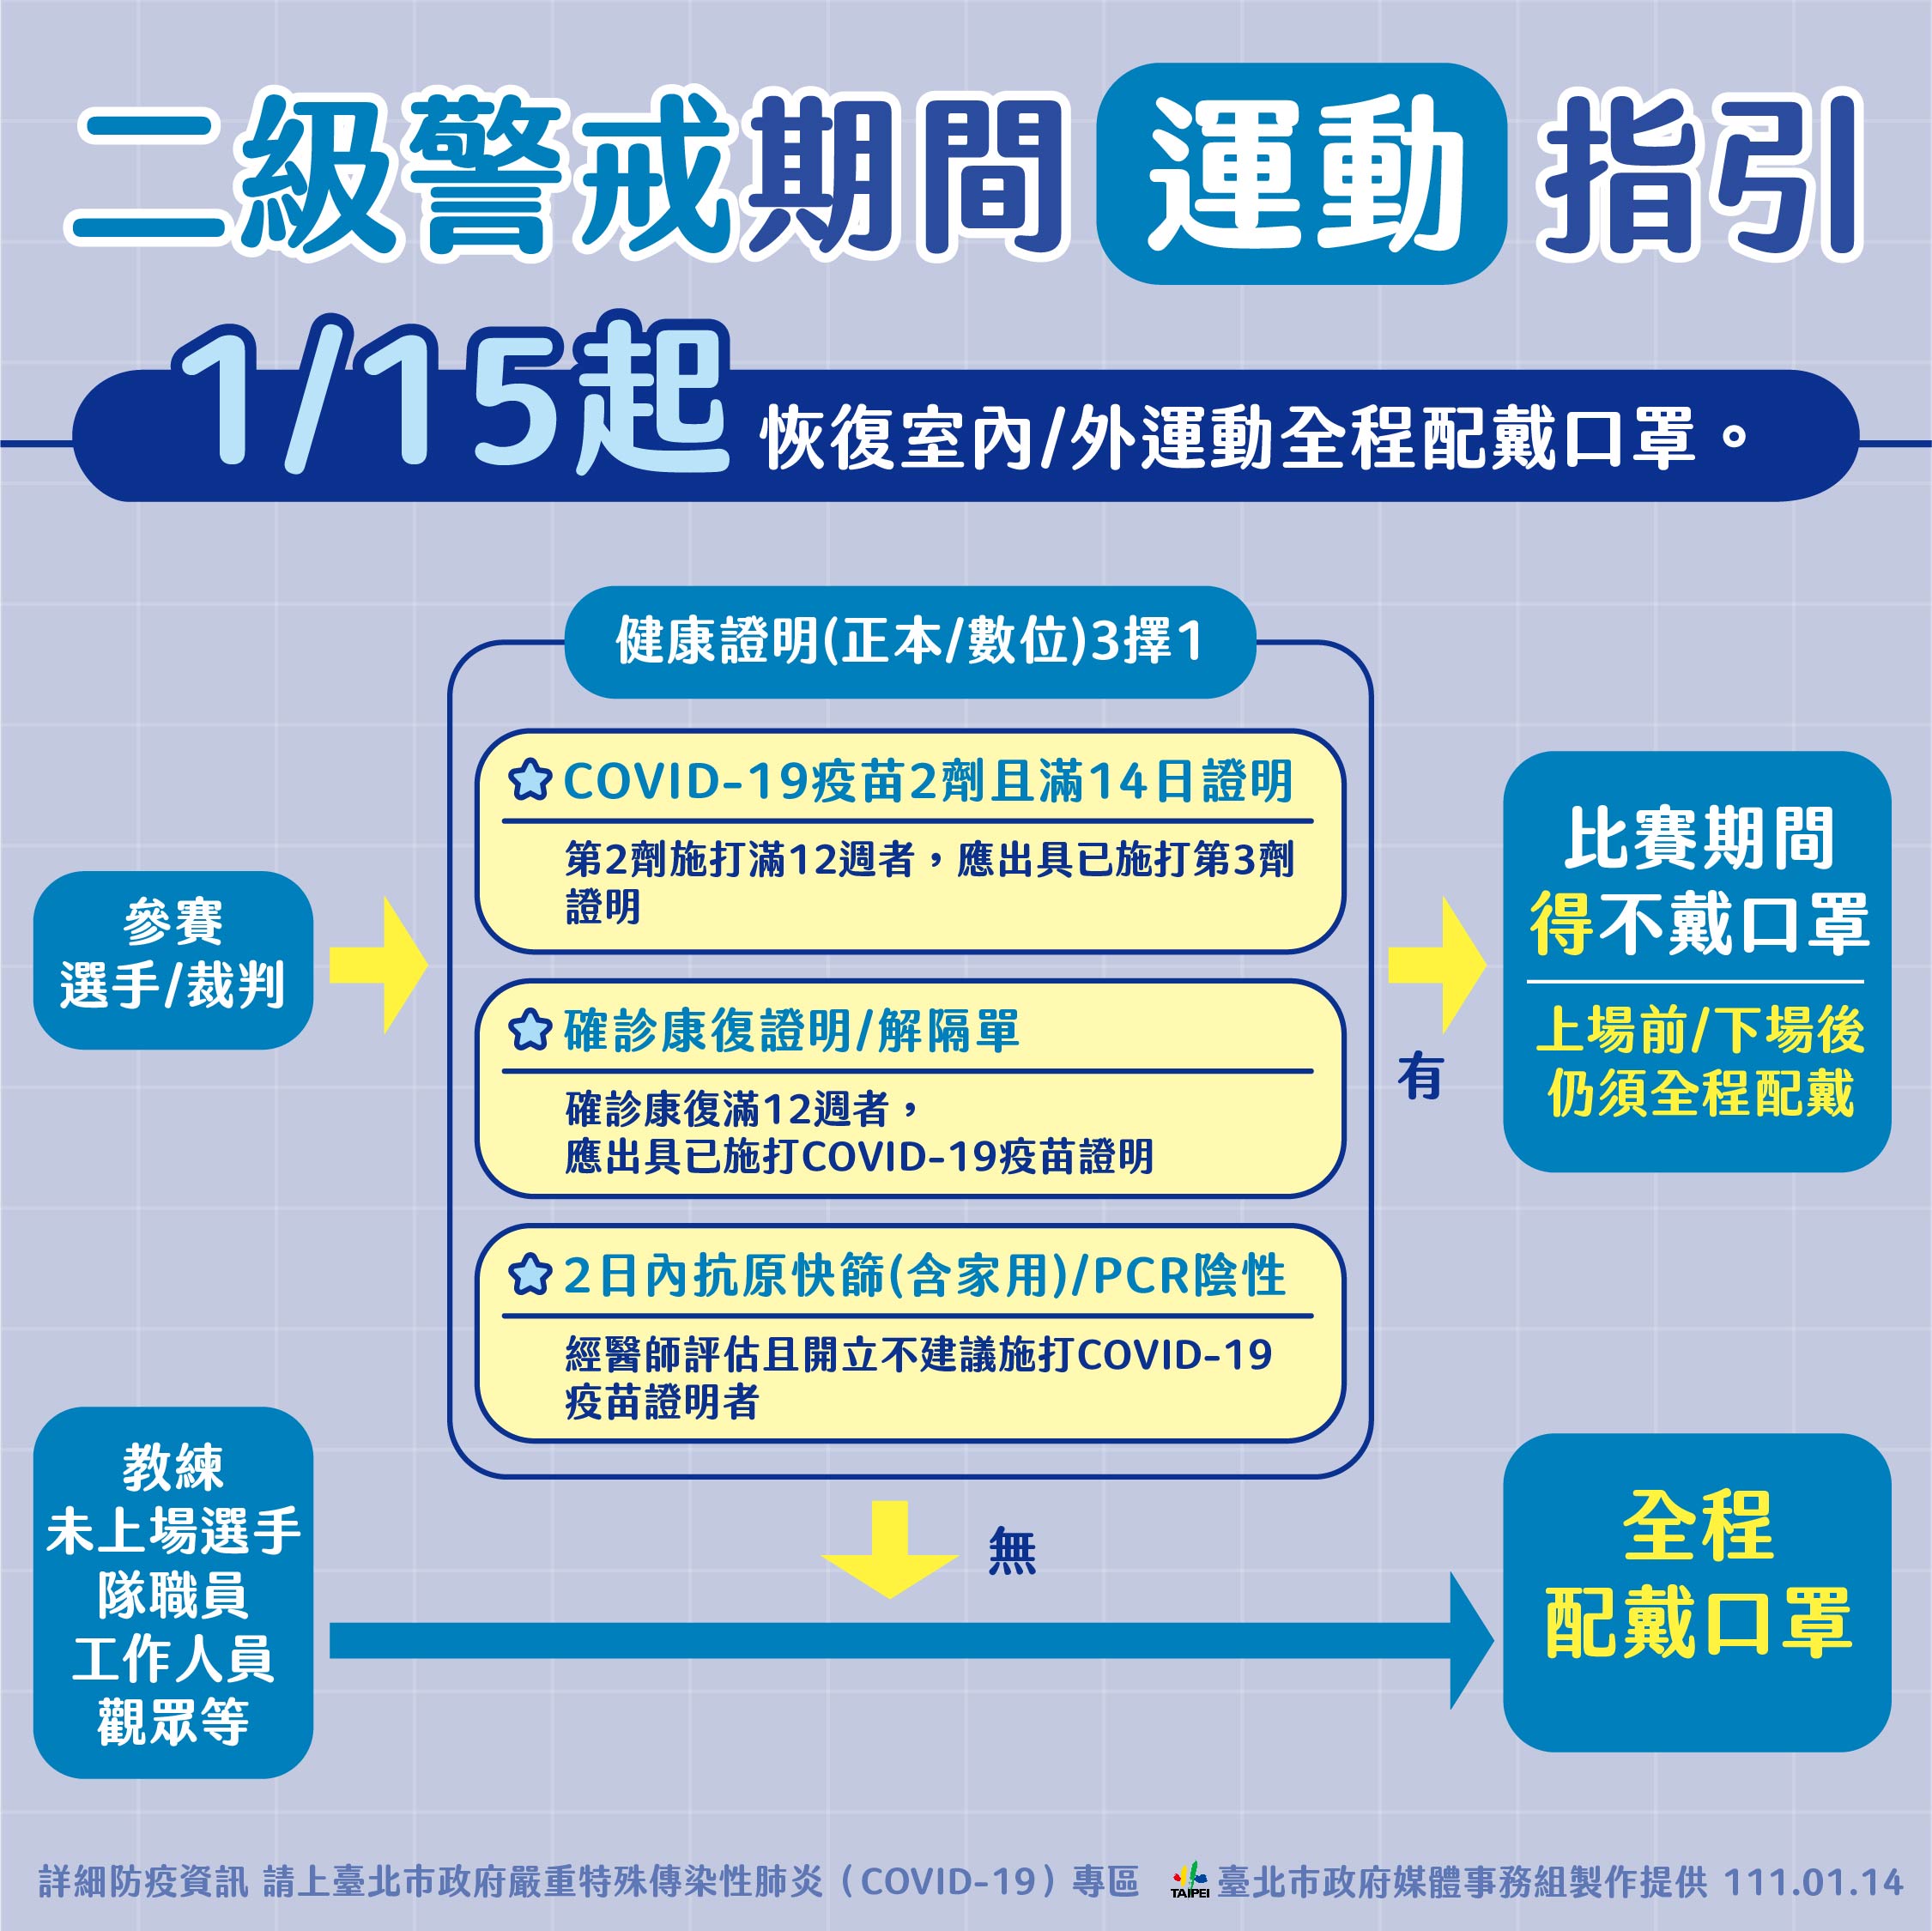 Poster on face mask regulations for exercising outdoor